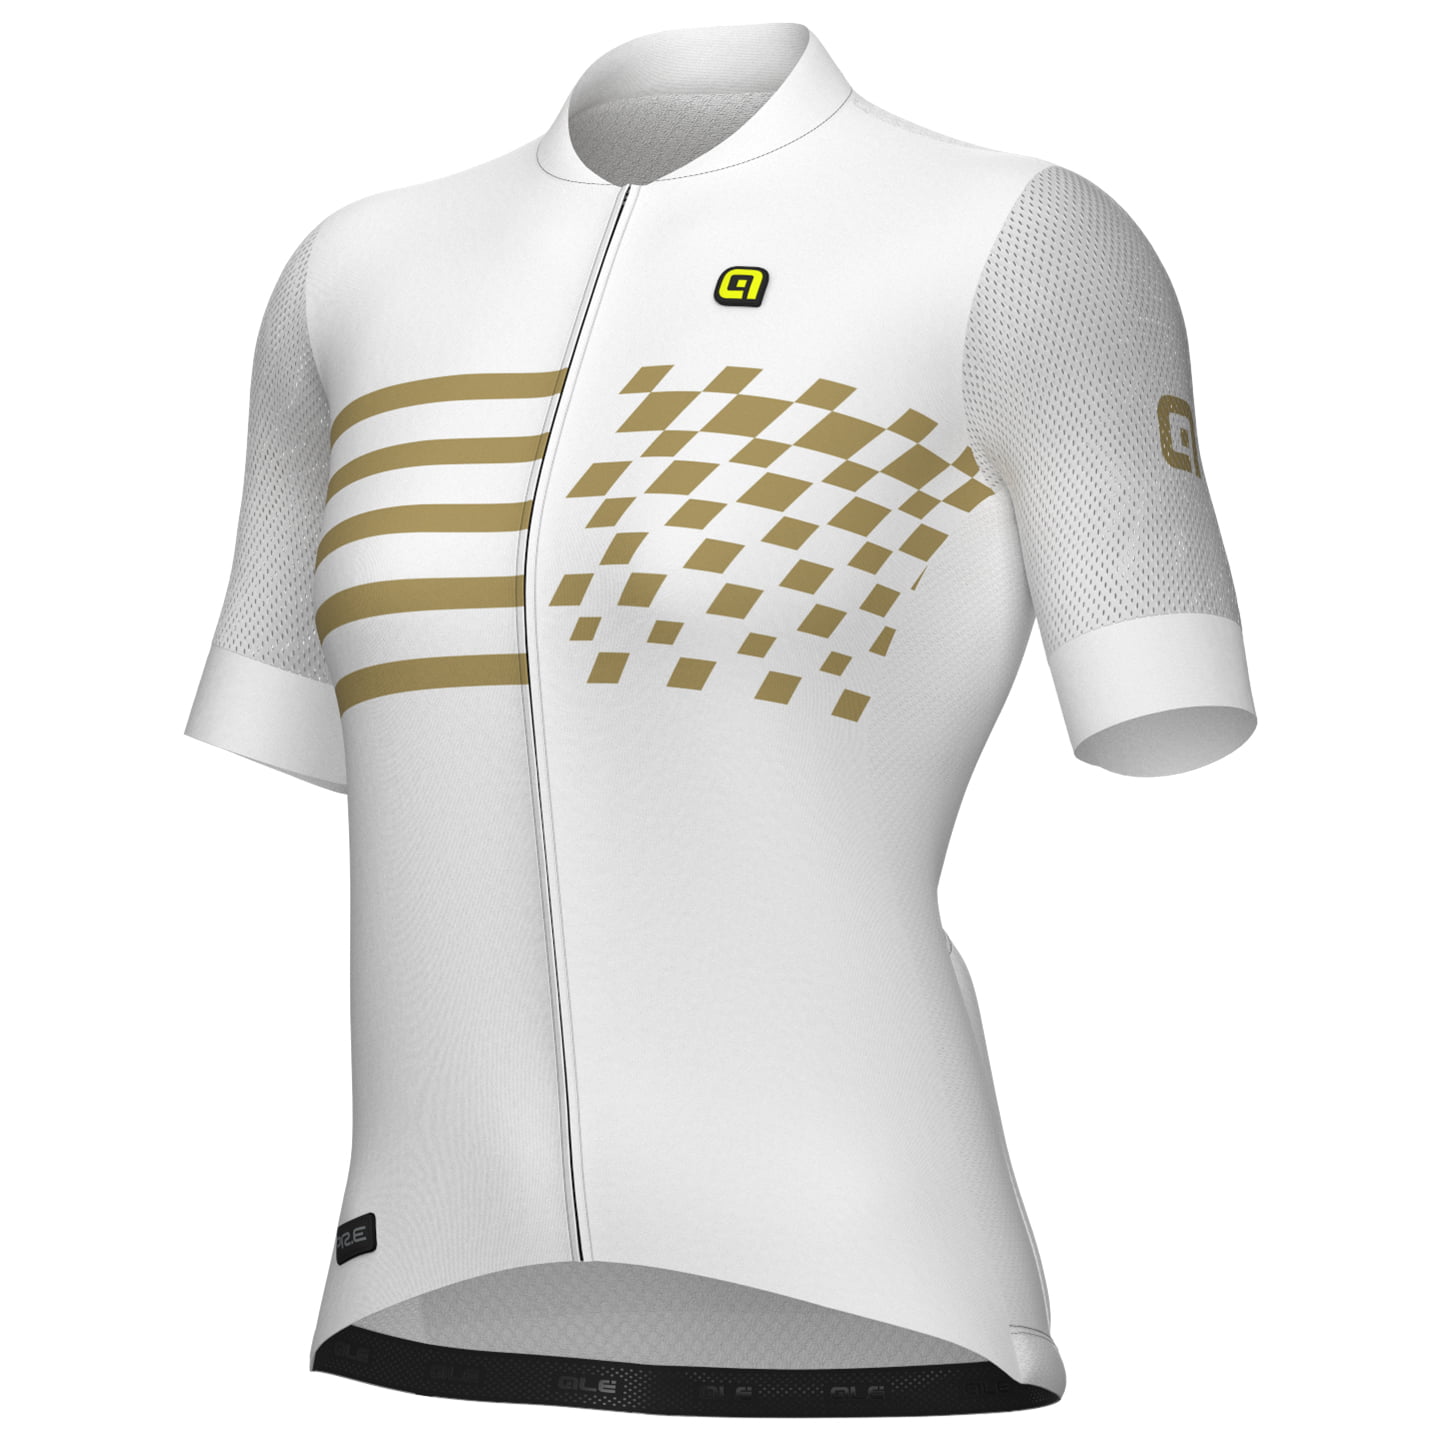 ALE Play Women’s Jersey Women’s Short Sleeve Jersey, size M, Cycling jersey, Cycle clothing